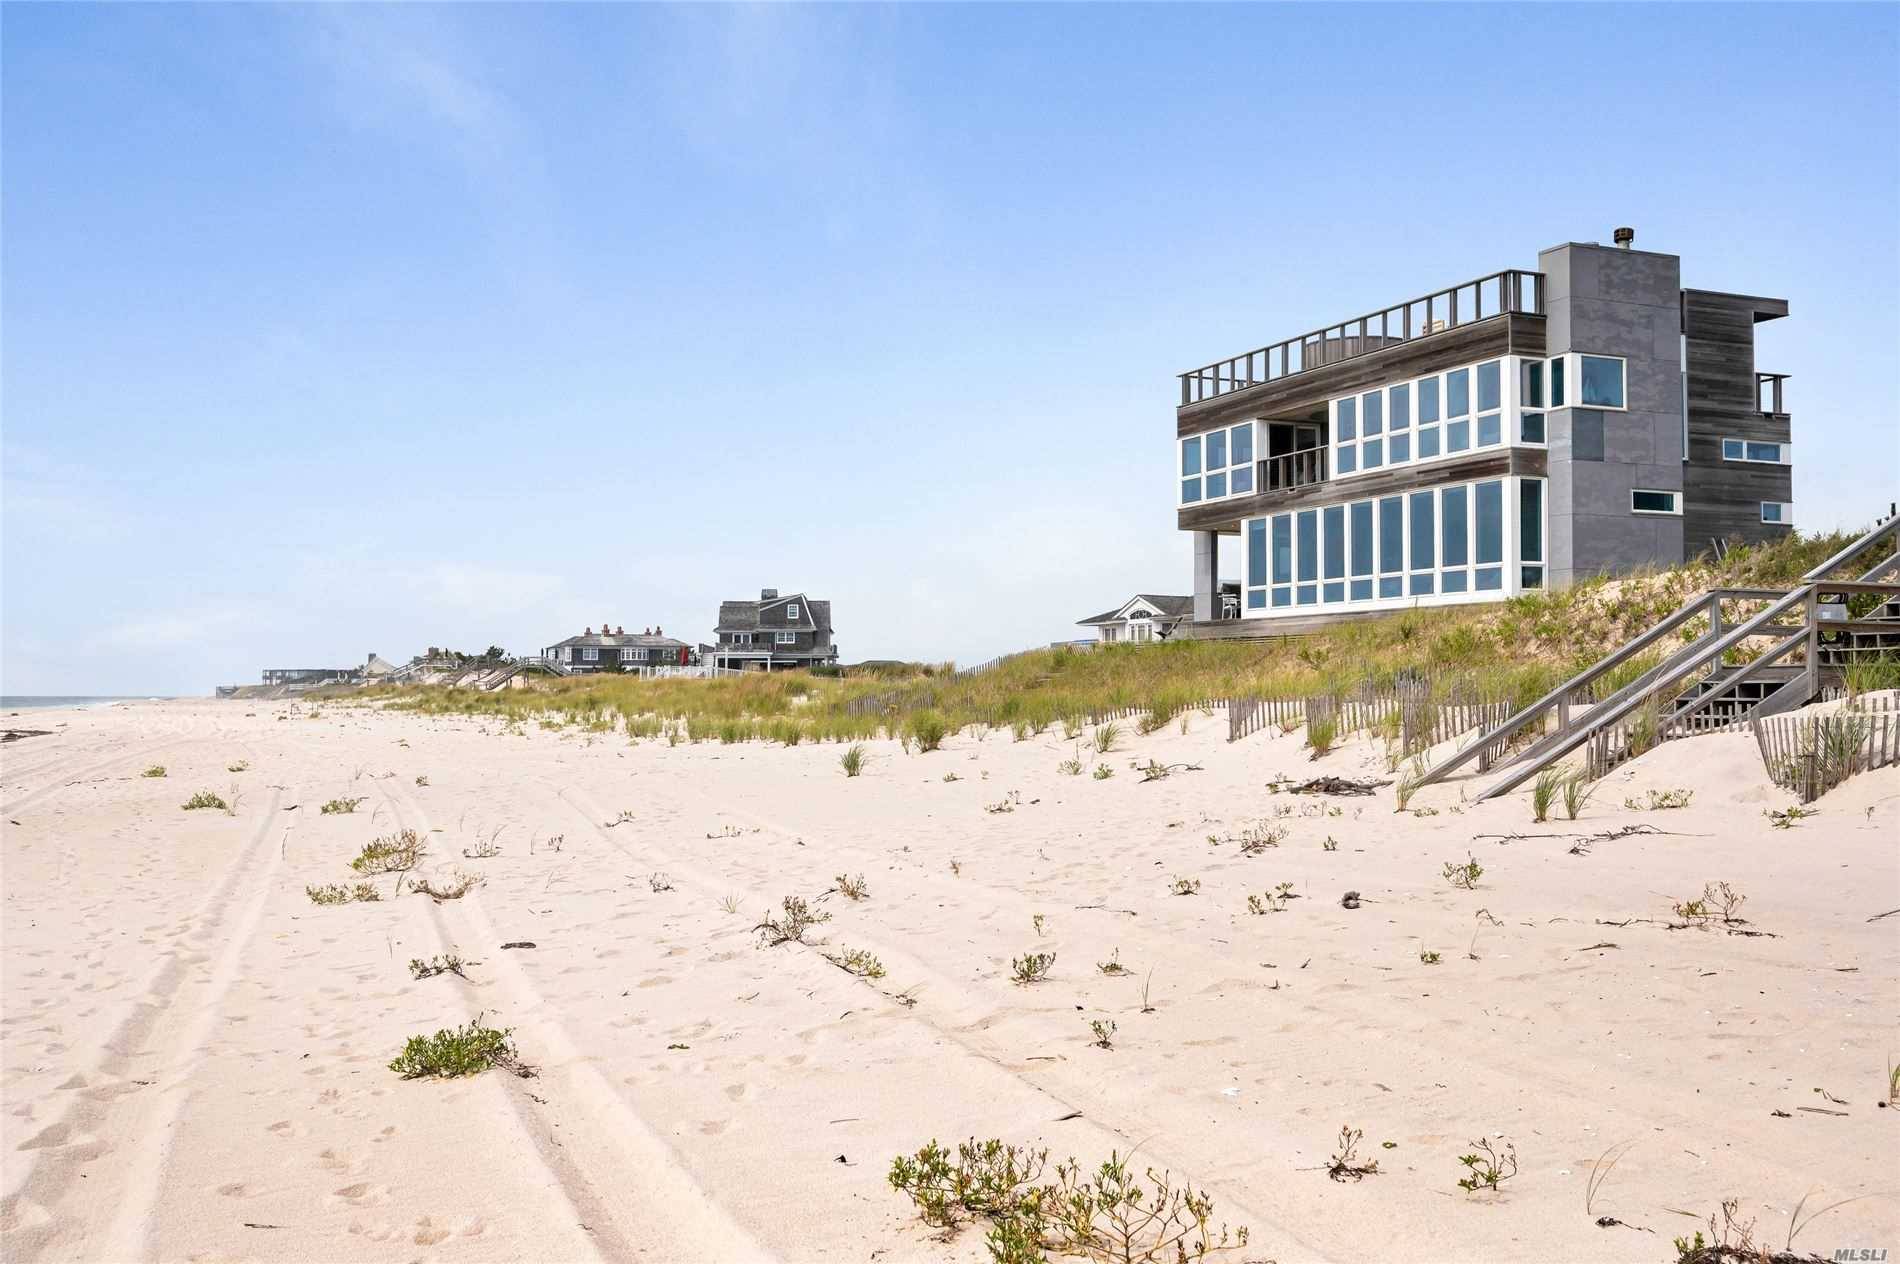 This property is spectacular, with 90 feet of ocean frontage, unobstructed views of Shinnecock Bay, and a chic, rooftop deck complete with fireplace and hot tub.